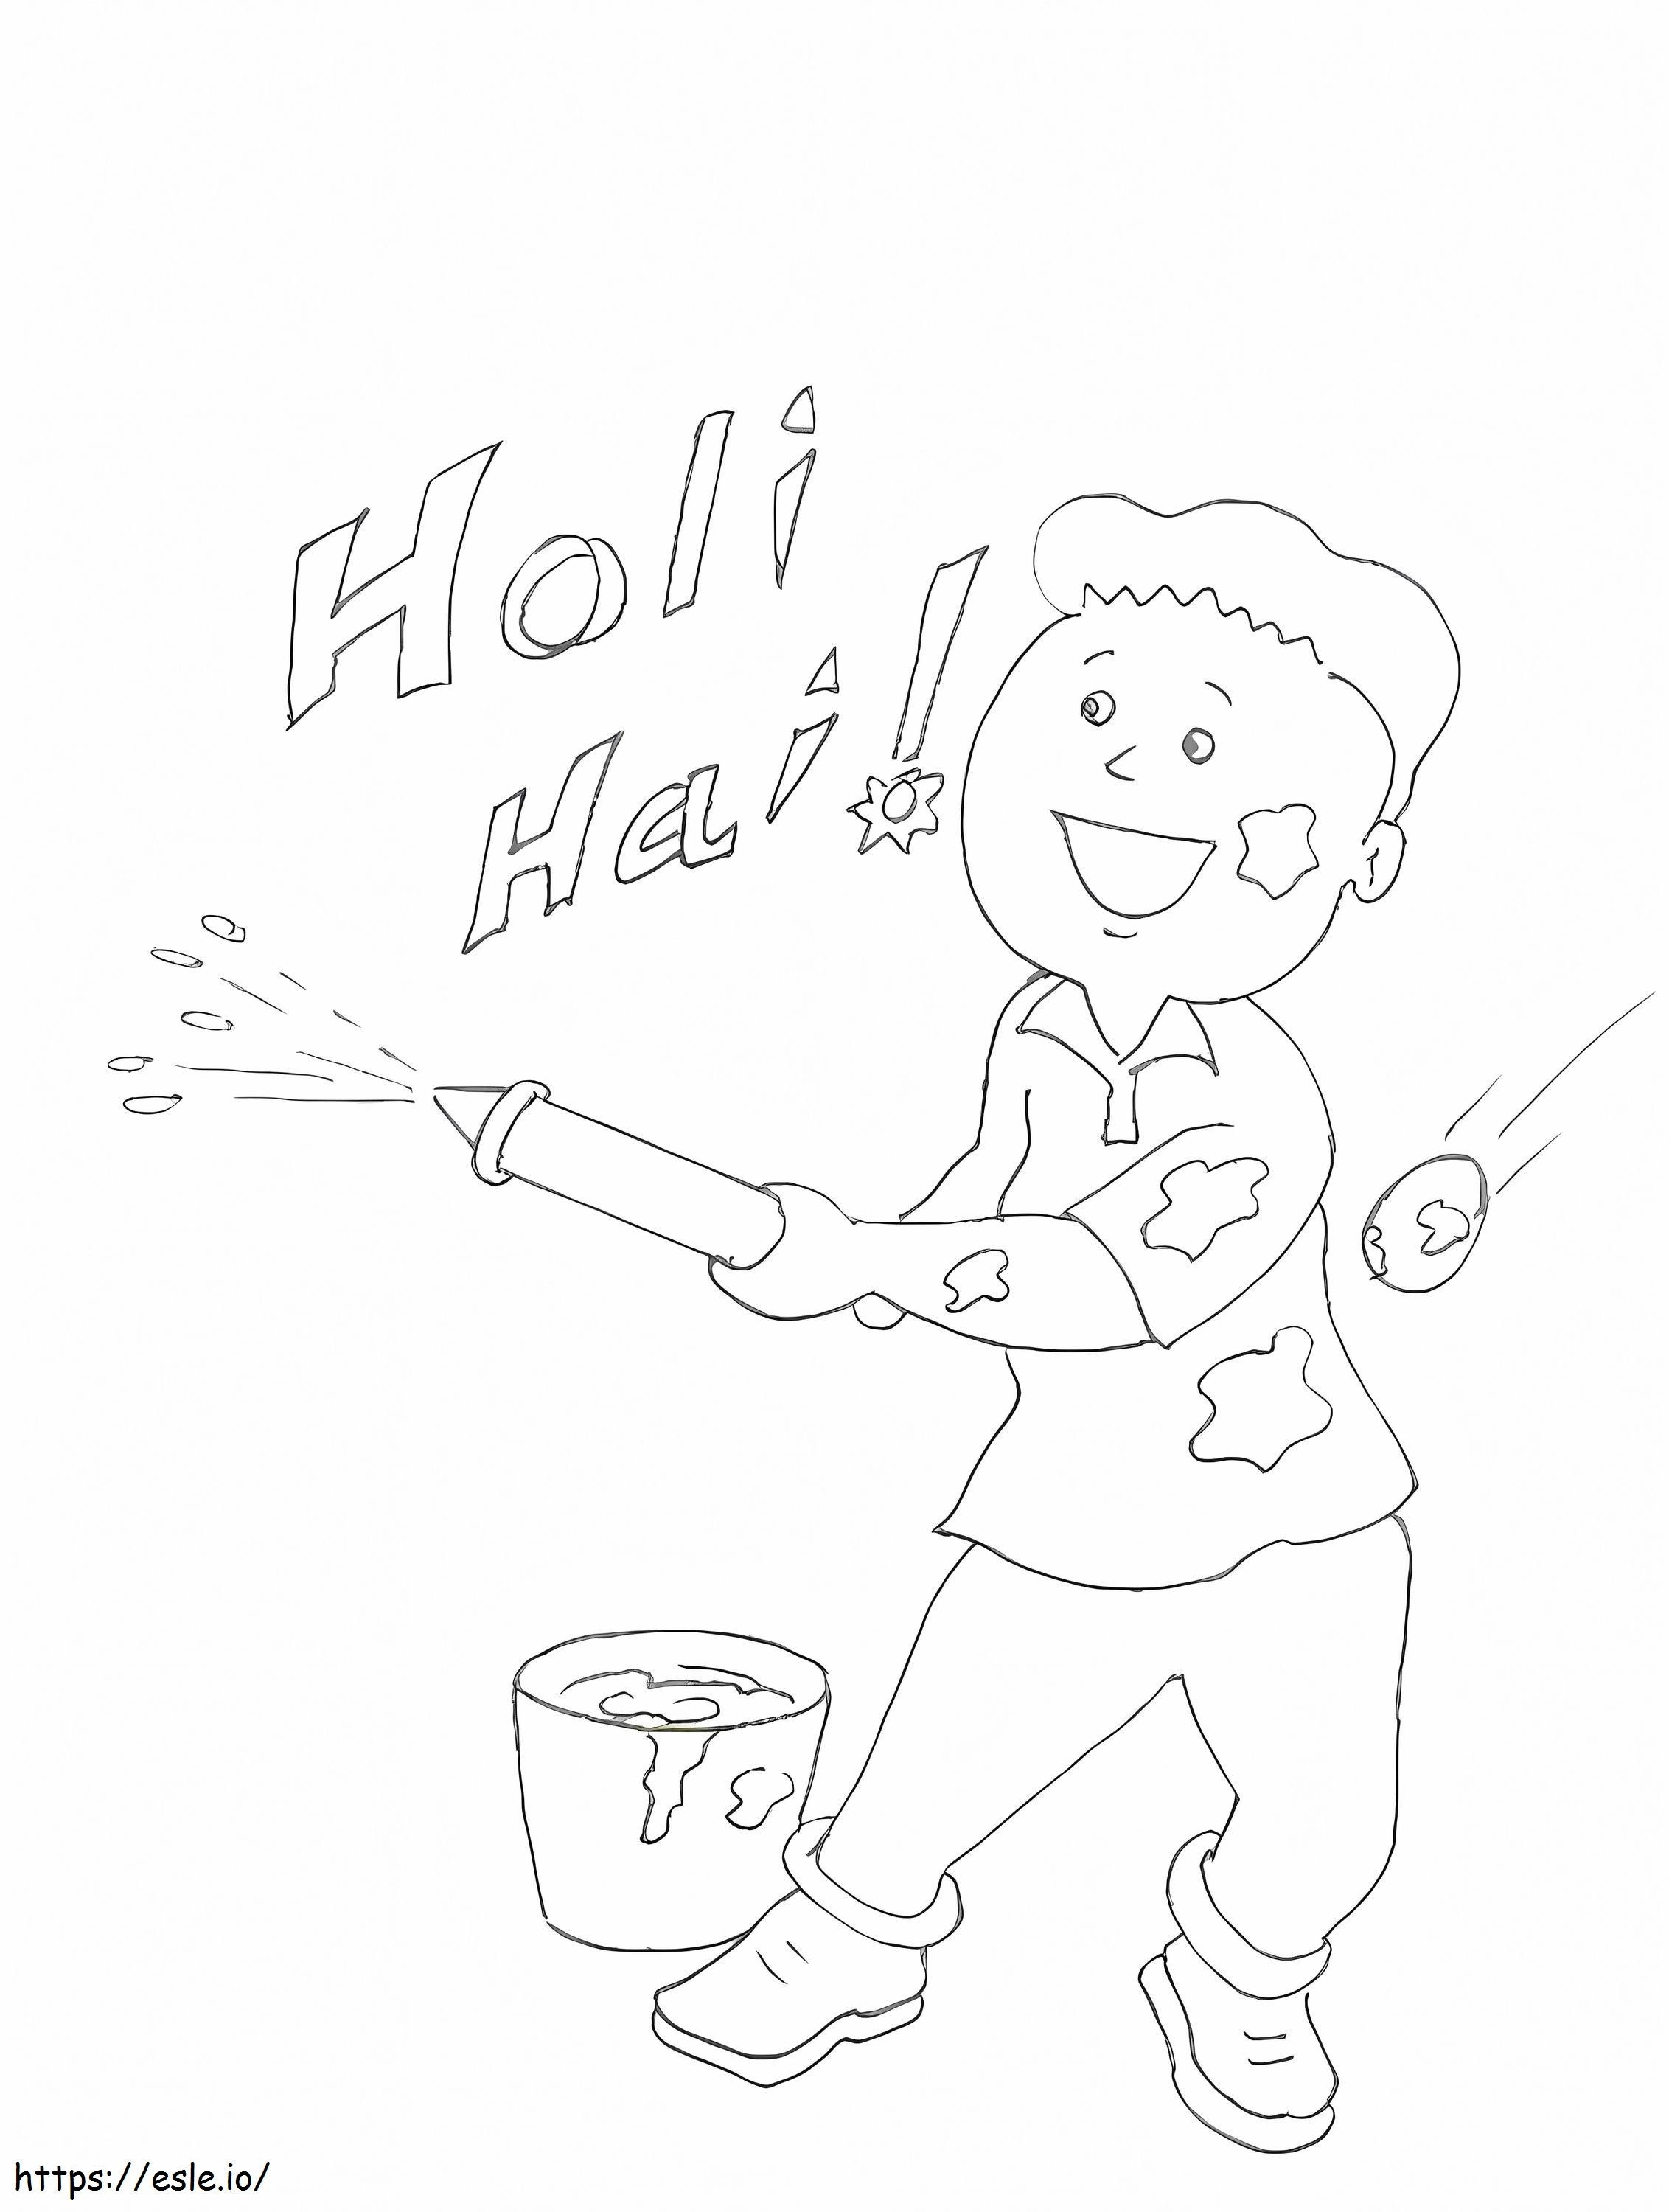 Holi 4 coloring page